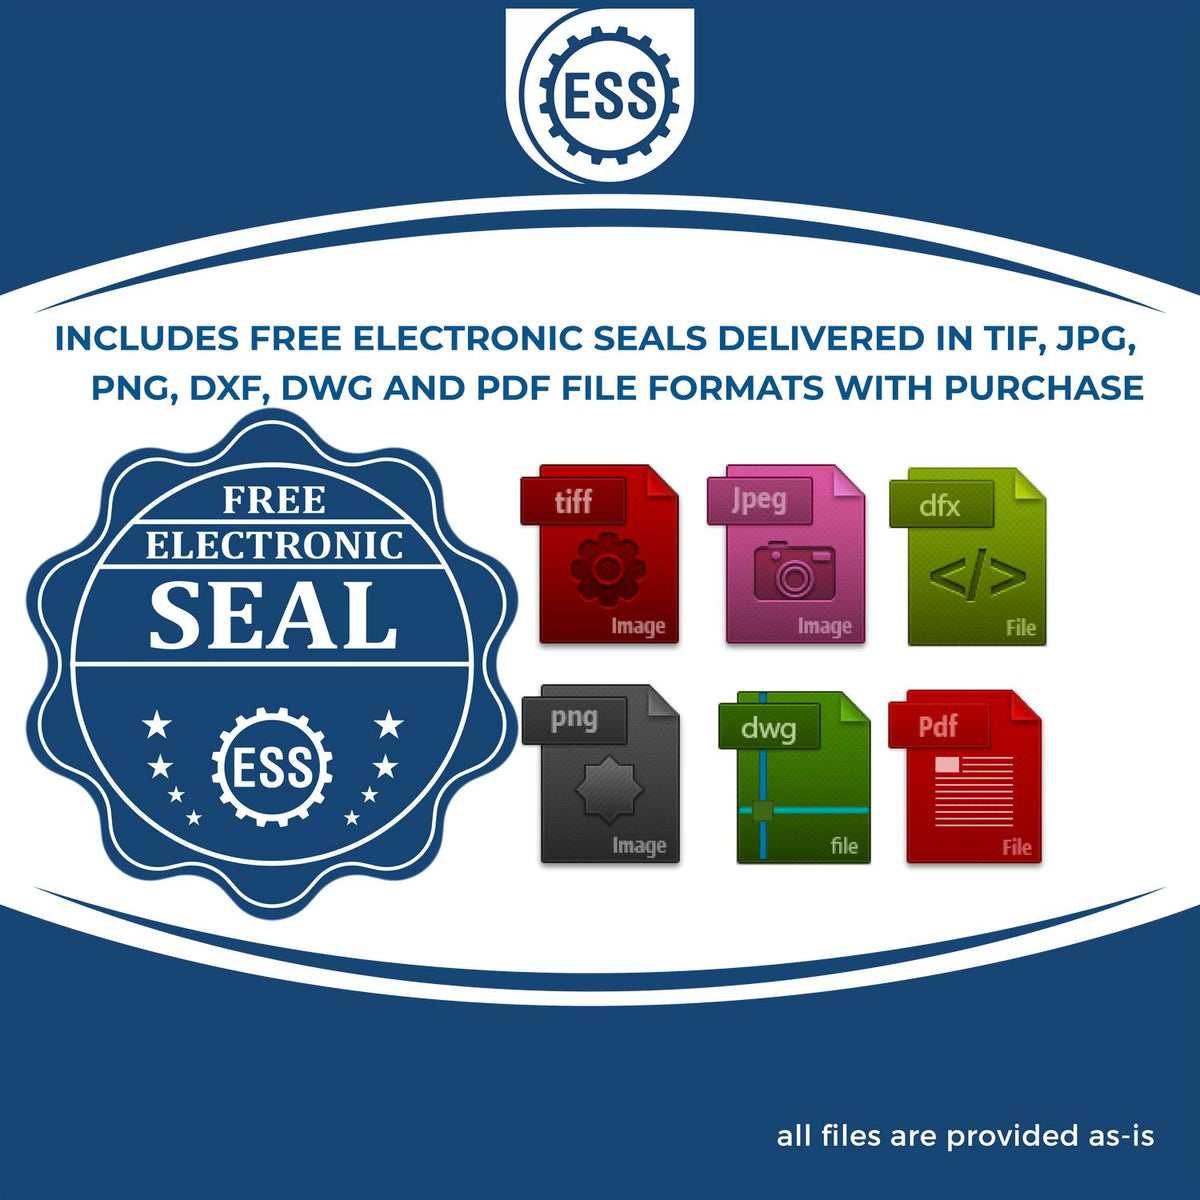 An infographic for the free electronic seal for the State of Colorado Extended Long Reach Geologist Seal illustrating the different file type icons such as DXF, DWG, TIF, JPG and PNG.